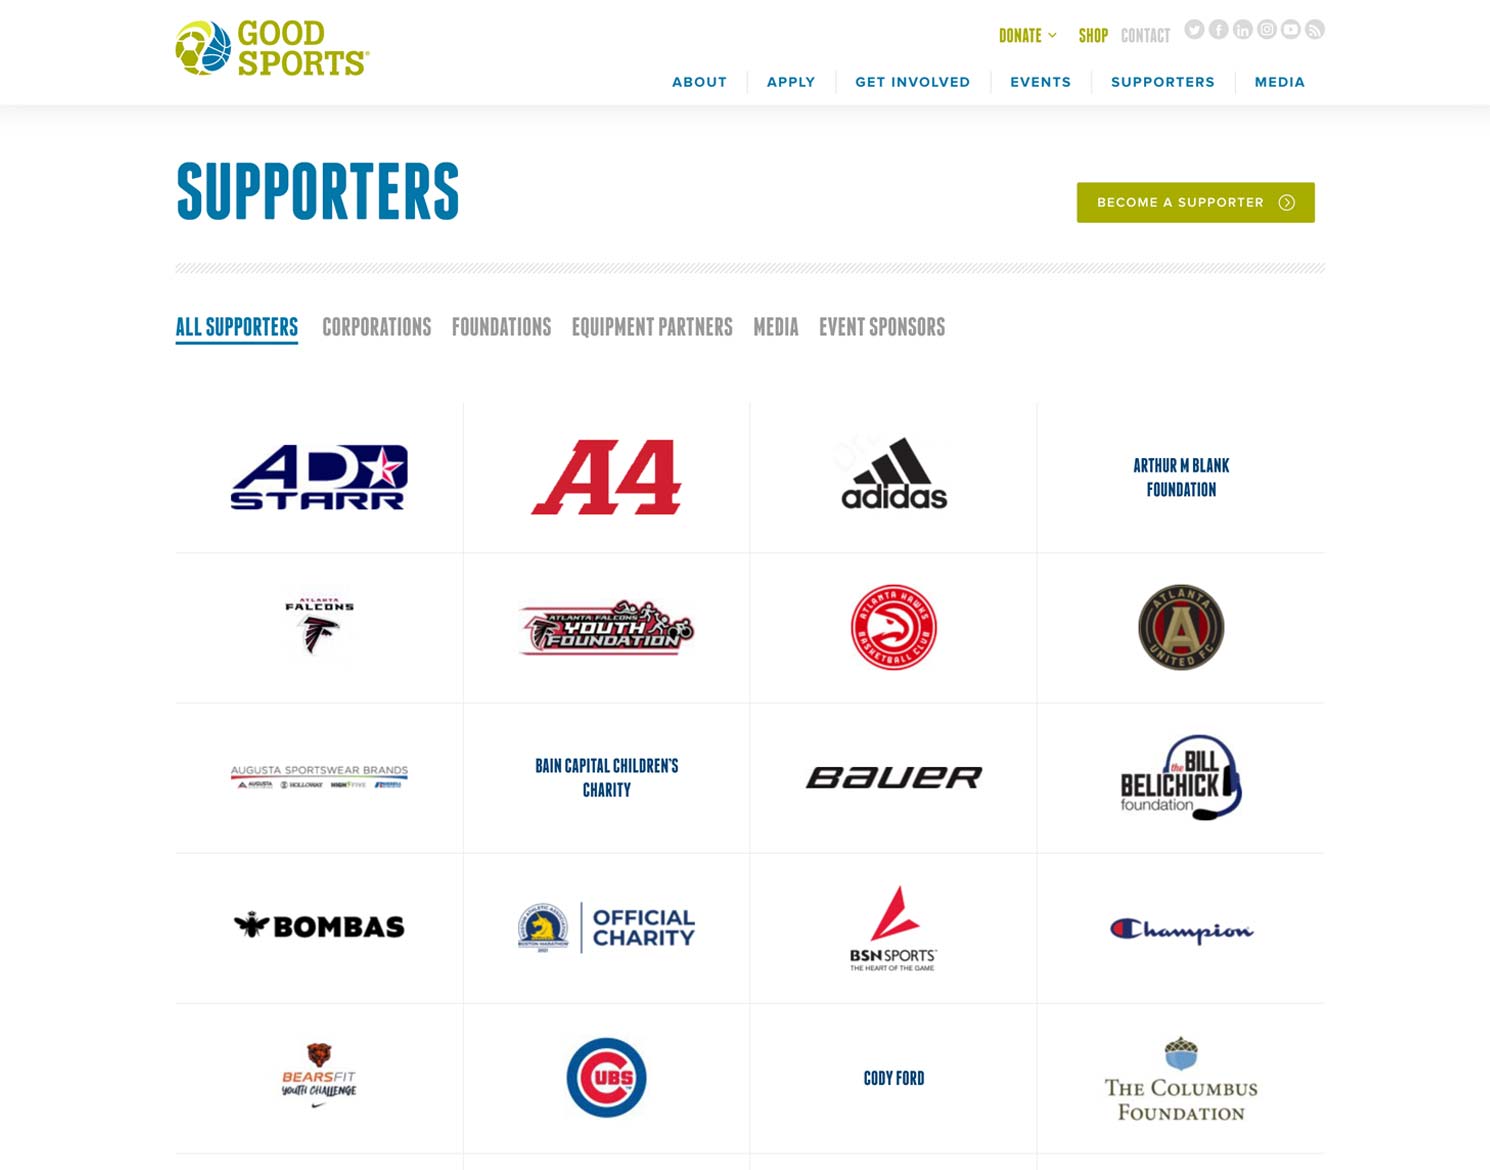 Good Sports website supporters page